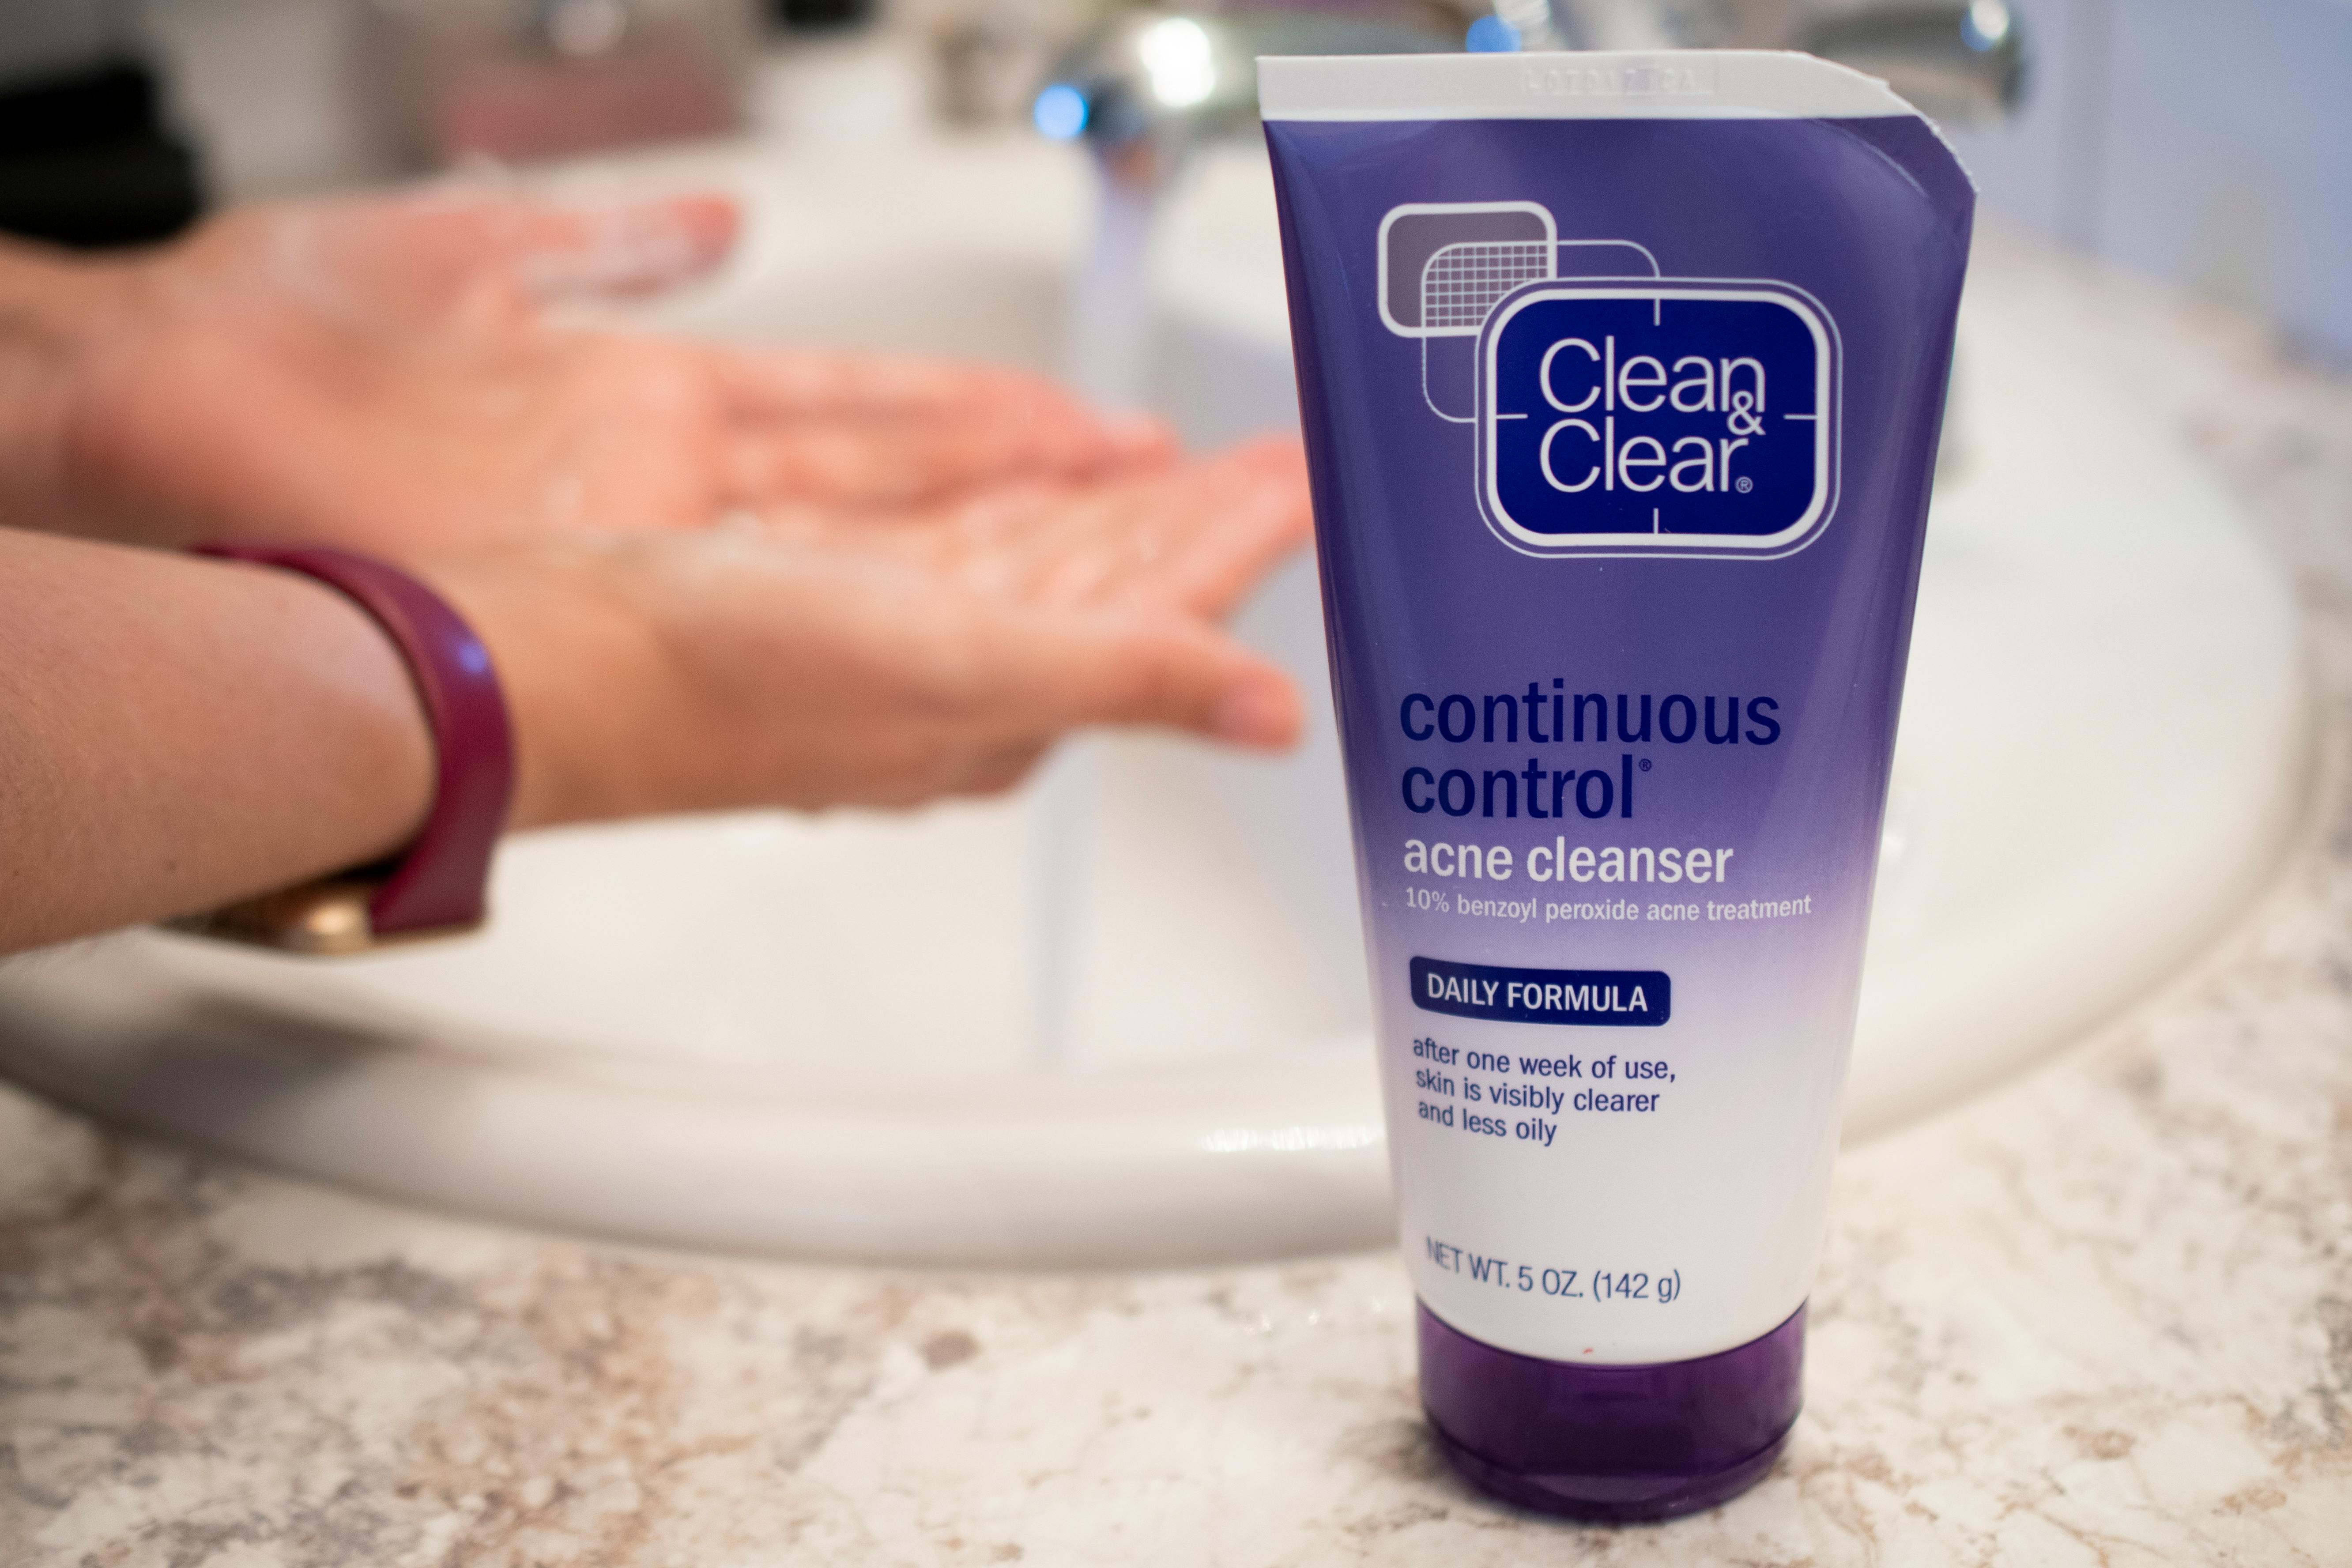 A person using Clean and Clear acne cleanser